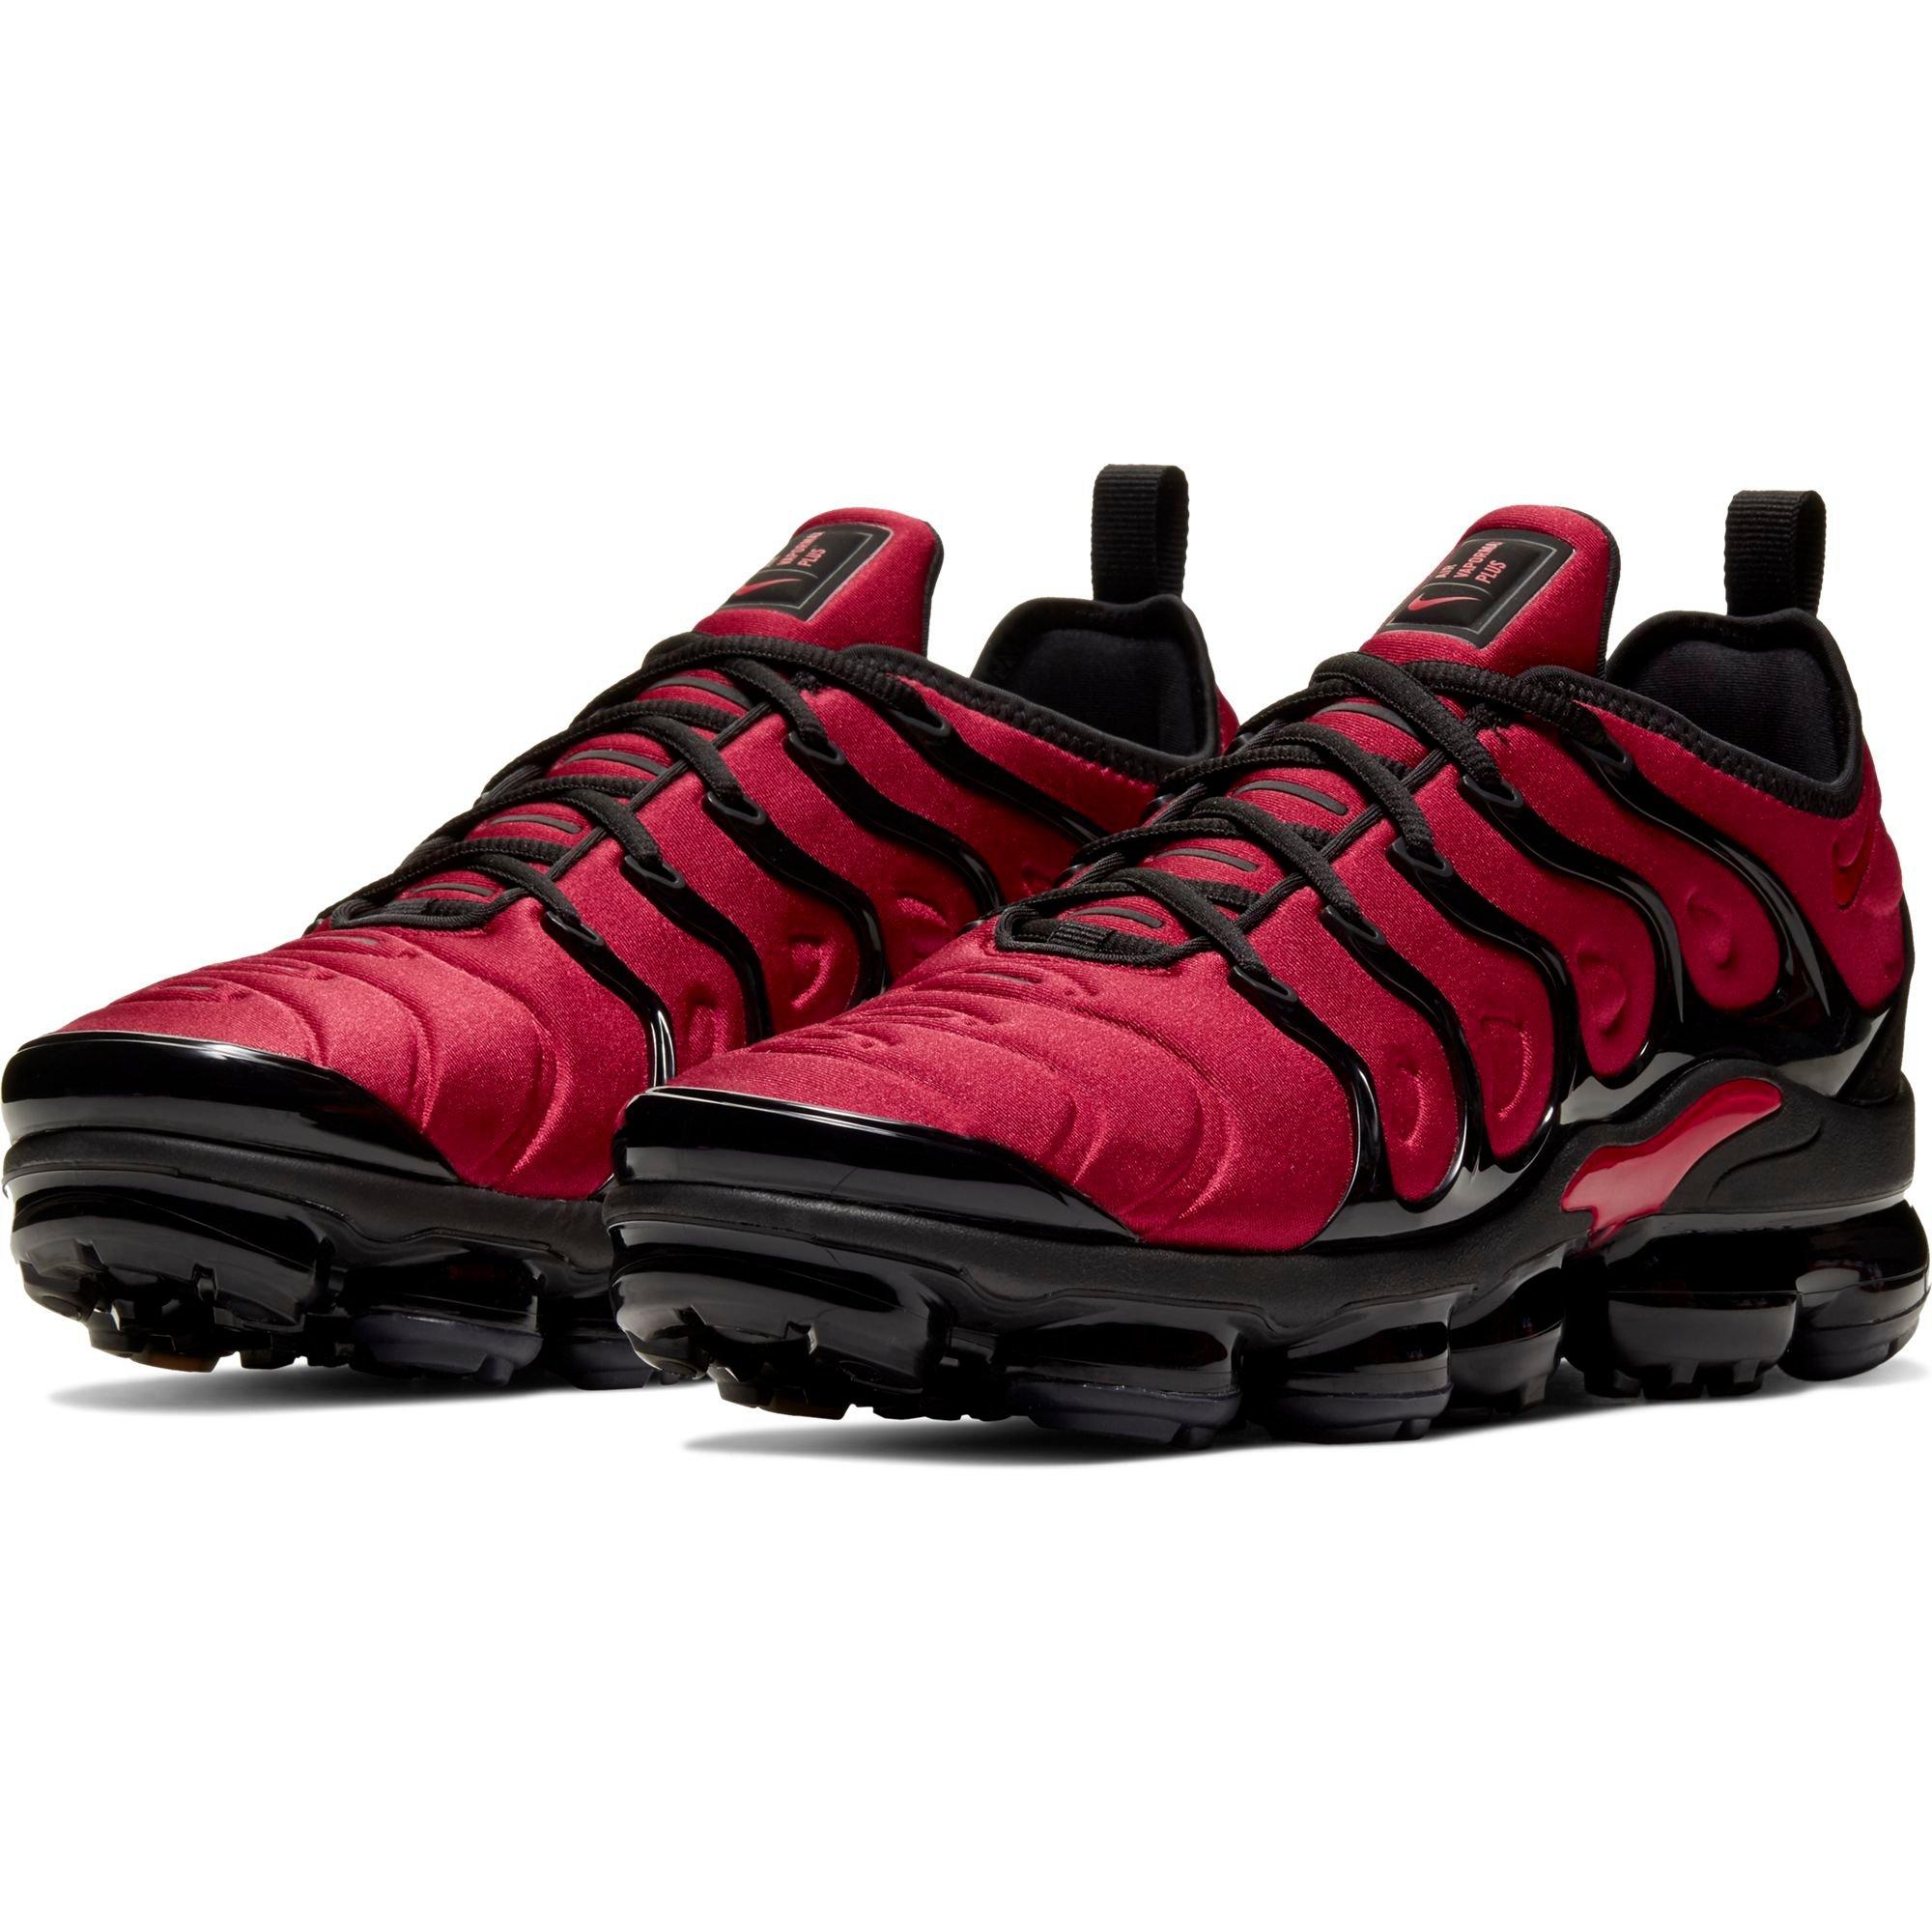 vapormax shoes black and red